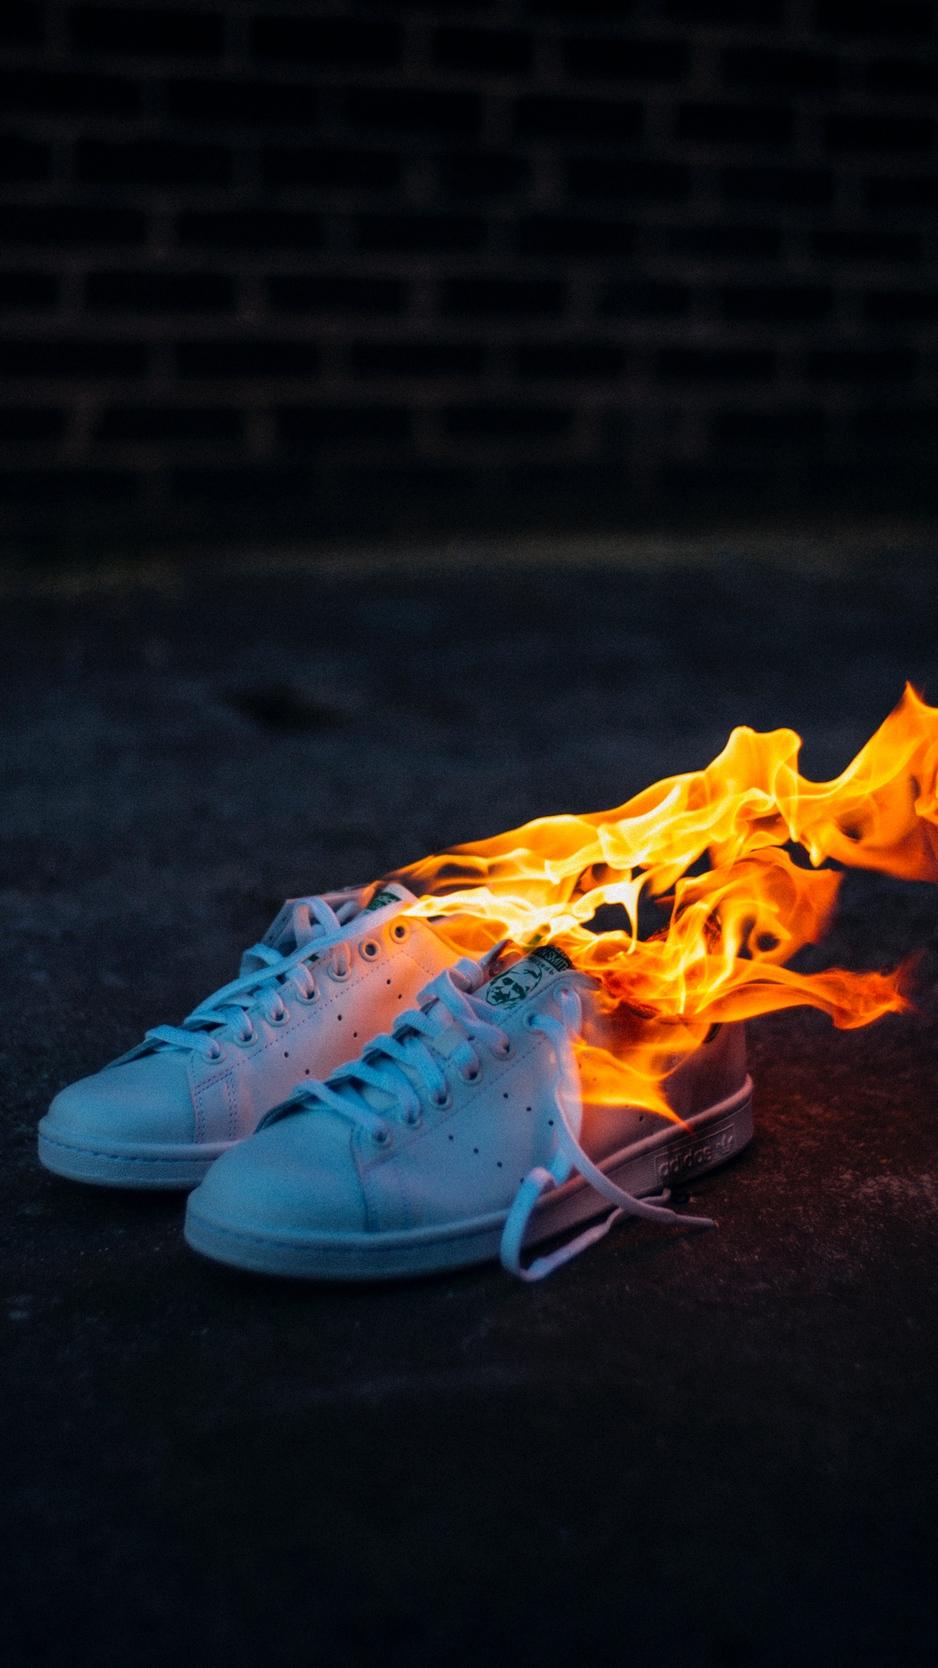 Download Wallpaper 938x1668 Sneakers, Fire, Flame Iphone 8 7